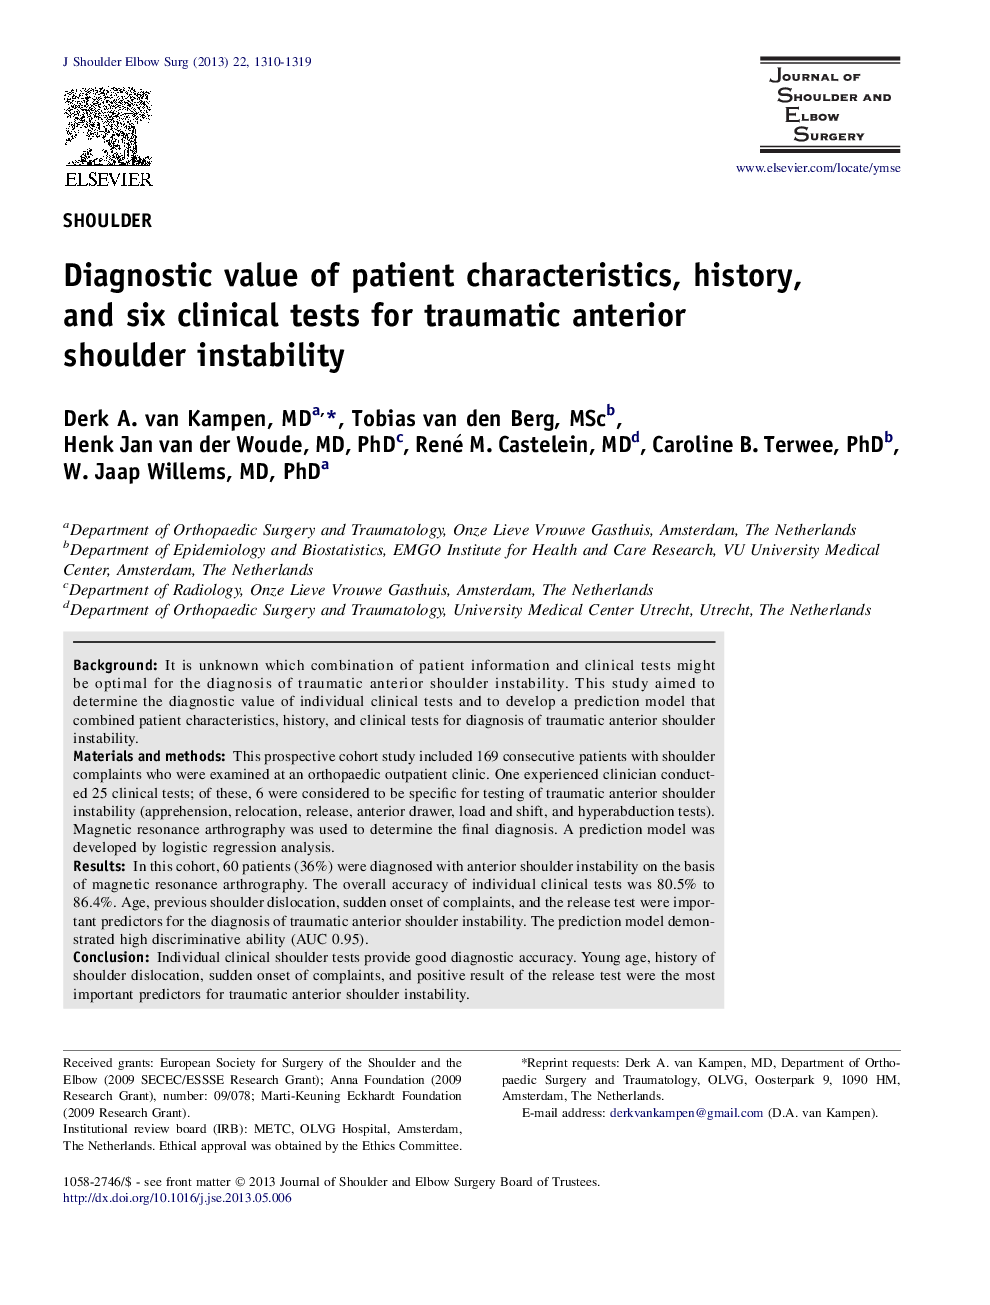 Diagnostic value of patient characteristics, history, and six clinical tests for traumatic anterior shoulder instability 